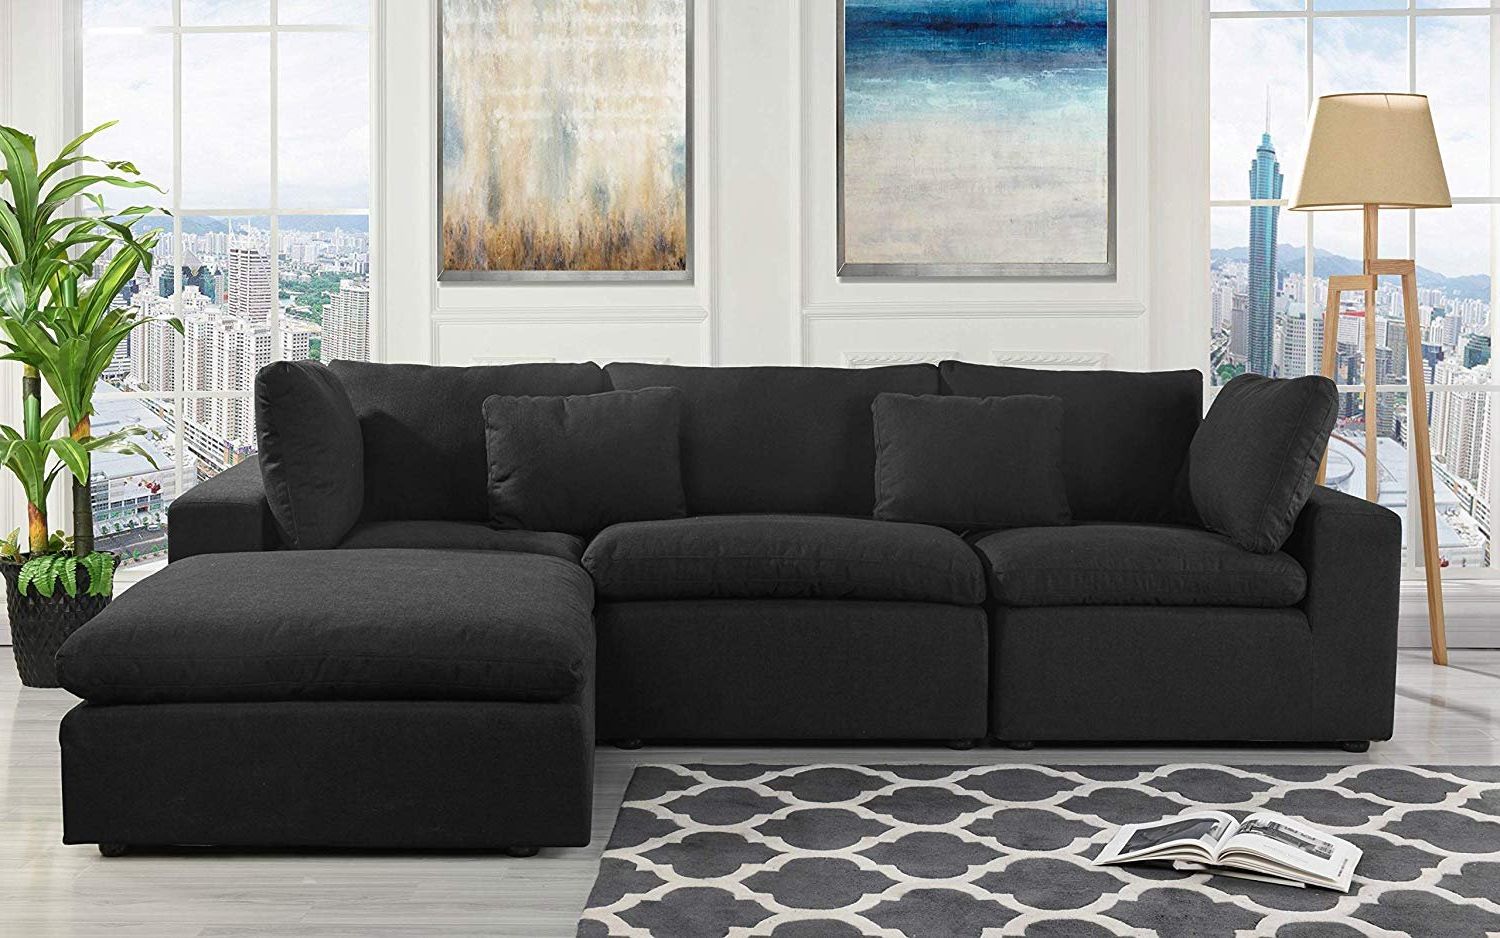 Classic Large Black Fabric Sectional Sofa, L Shape Couch With Wide Intended For Traditional Black Fabric Sofas (View 4 of 20)